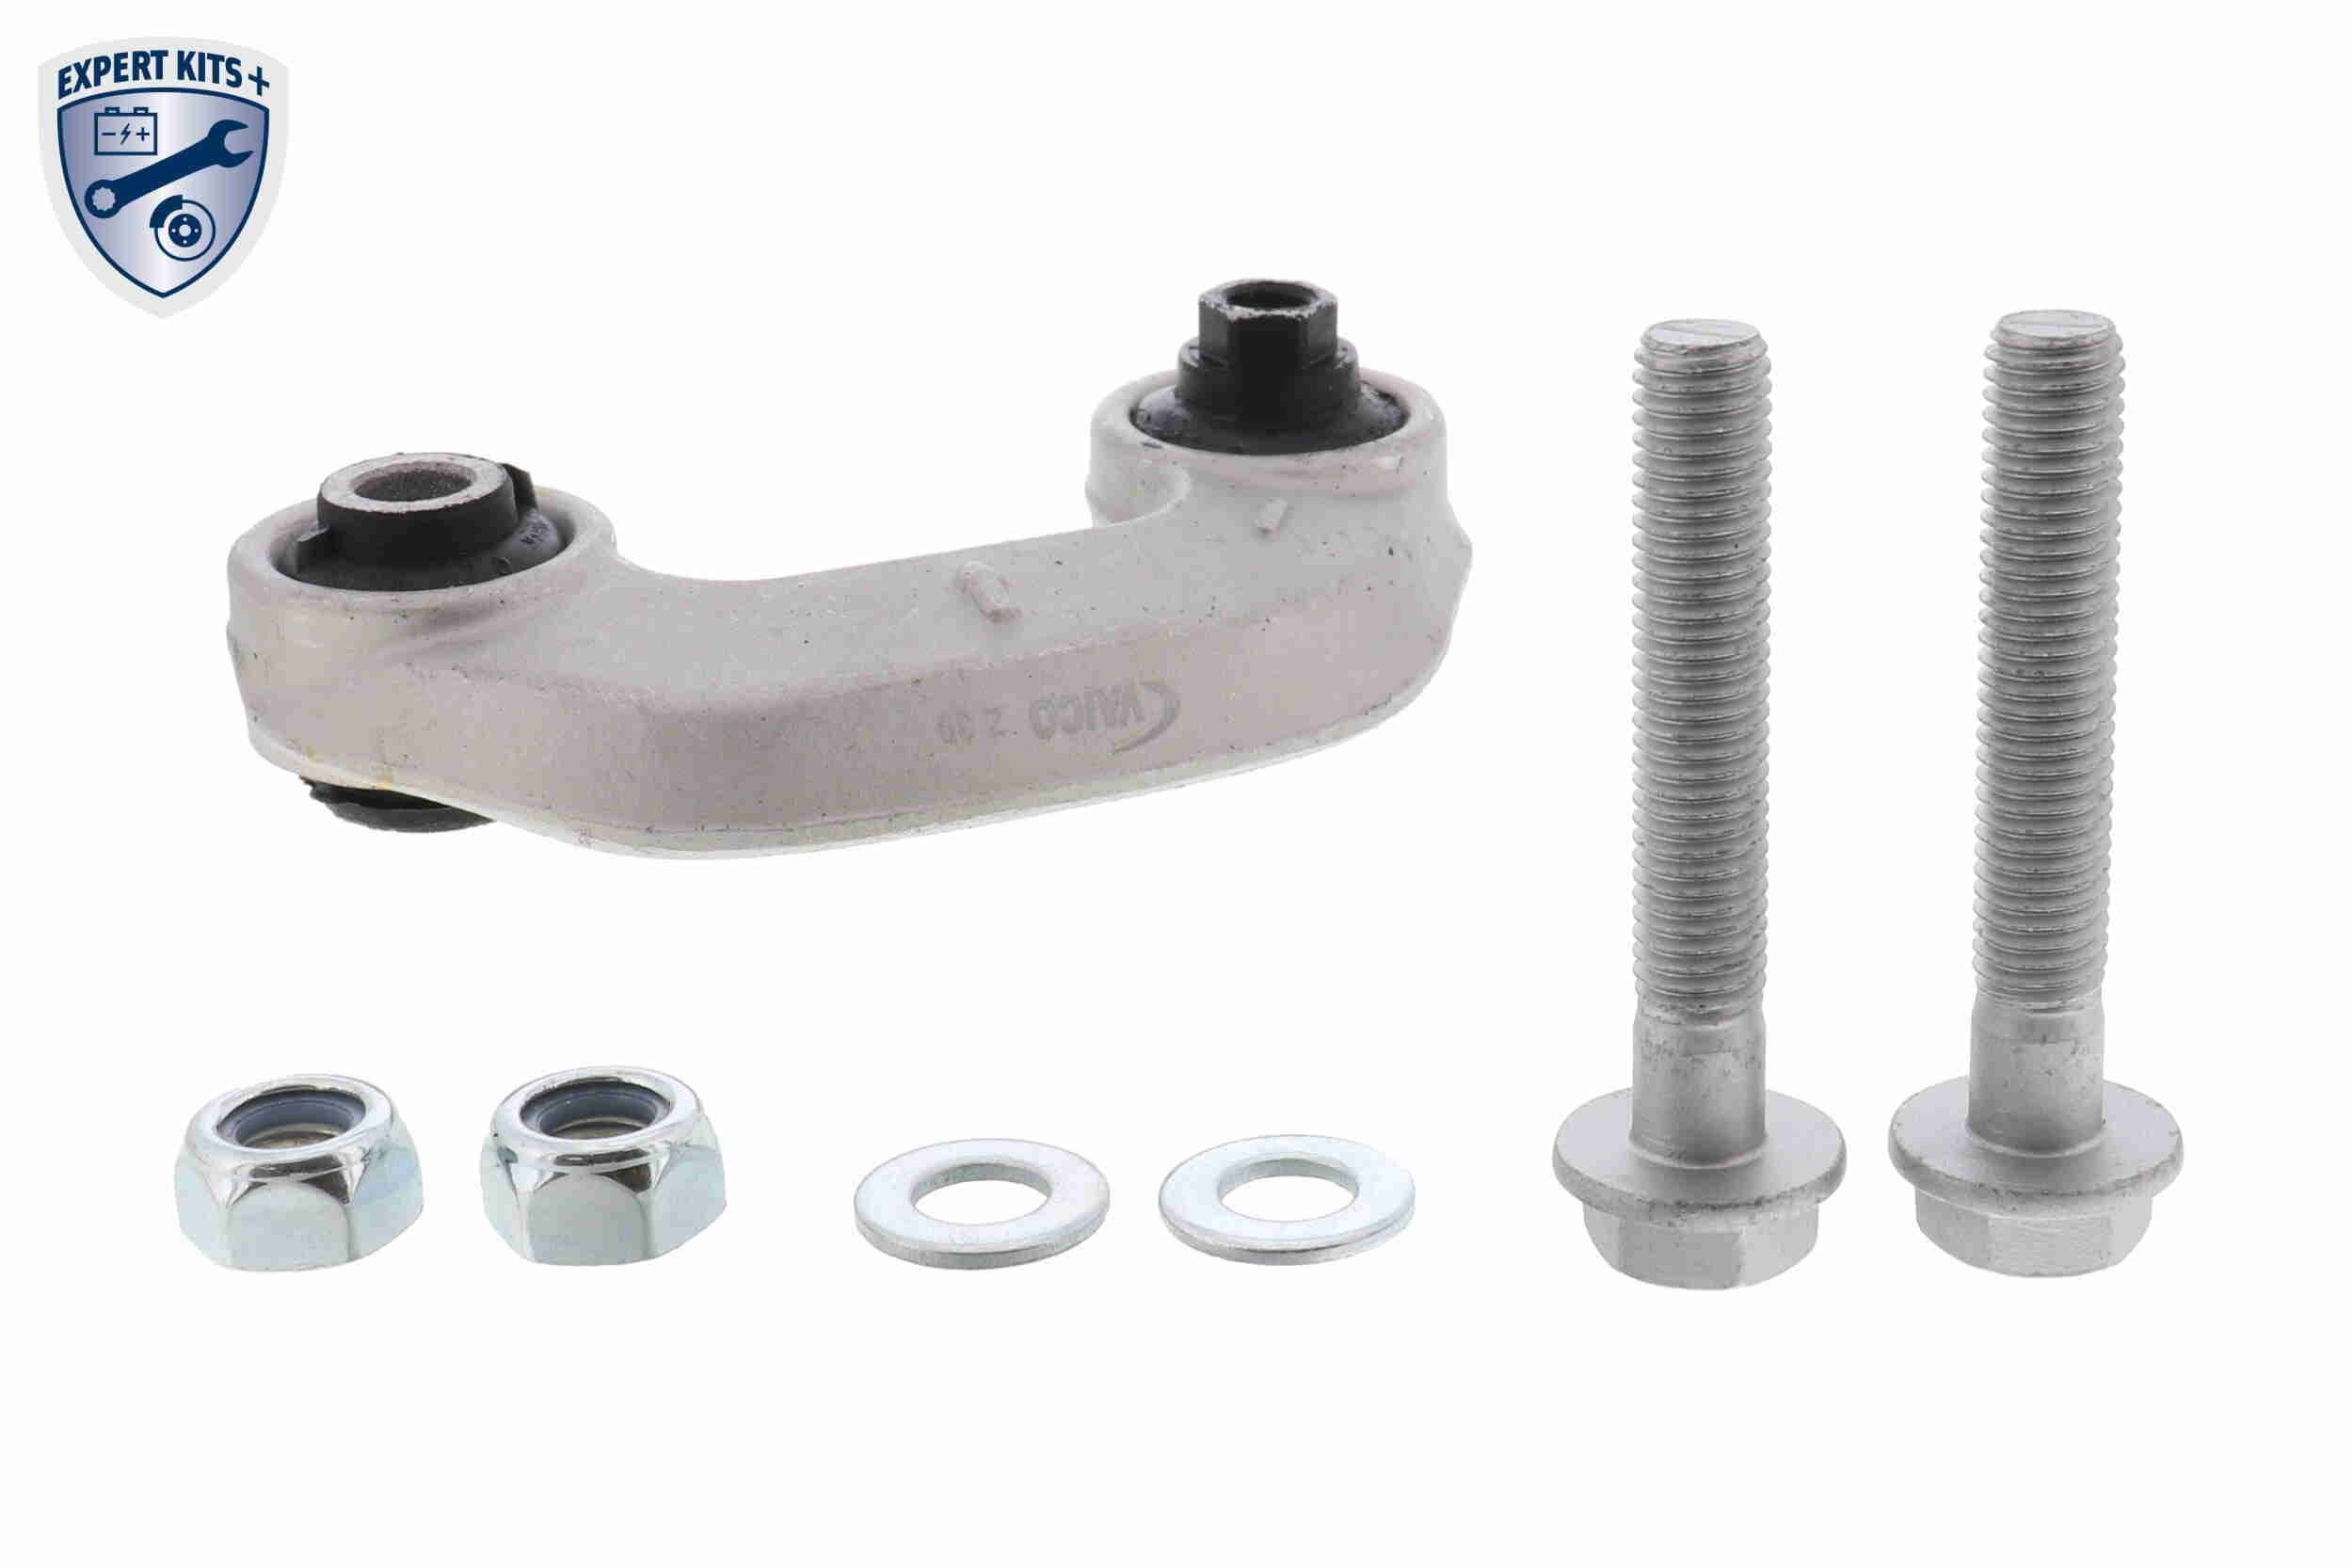 VAICO 8E0 498 151 M Control arm Front Axle, Lower, with bearing(s), EXPERT KITS +